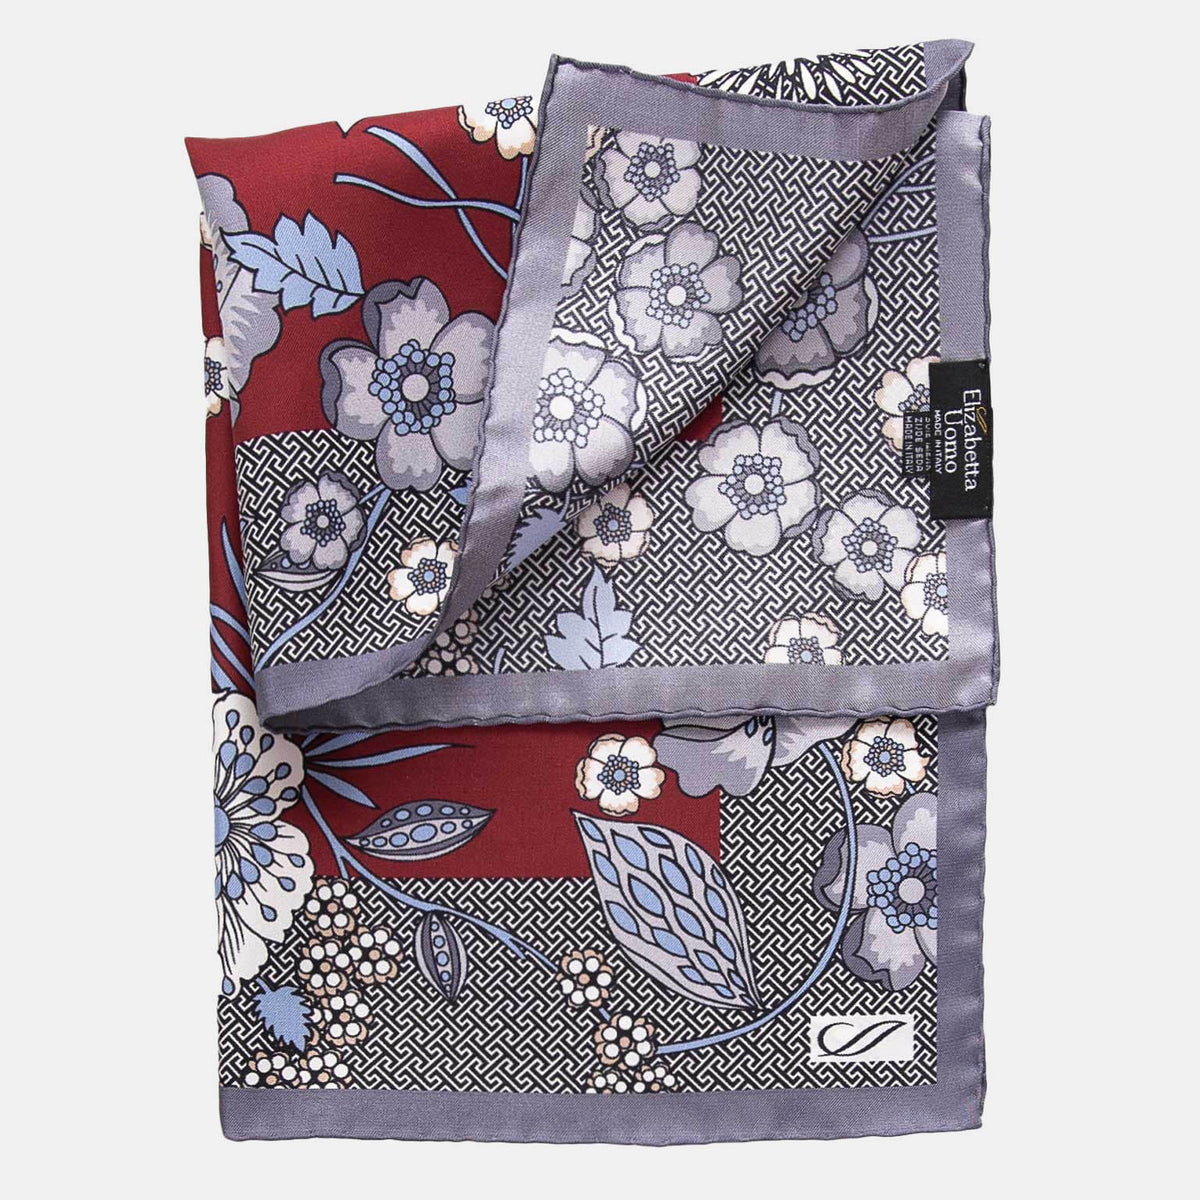 Burgundy Floral Pocket Square handmade in Como Italy